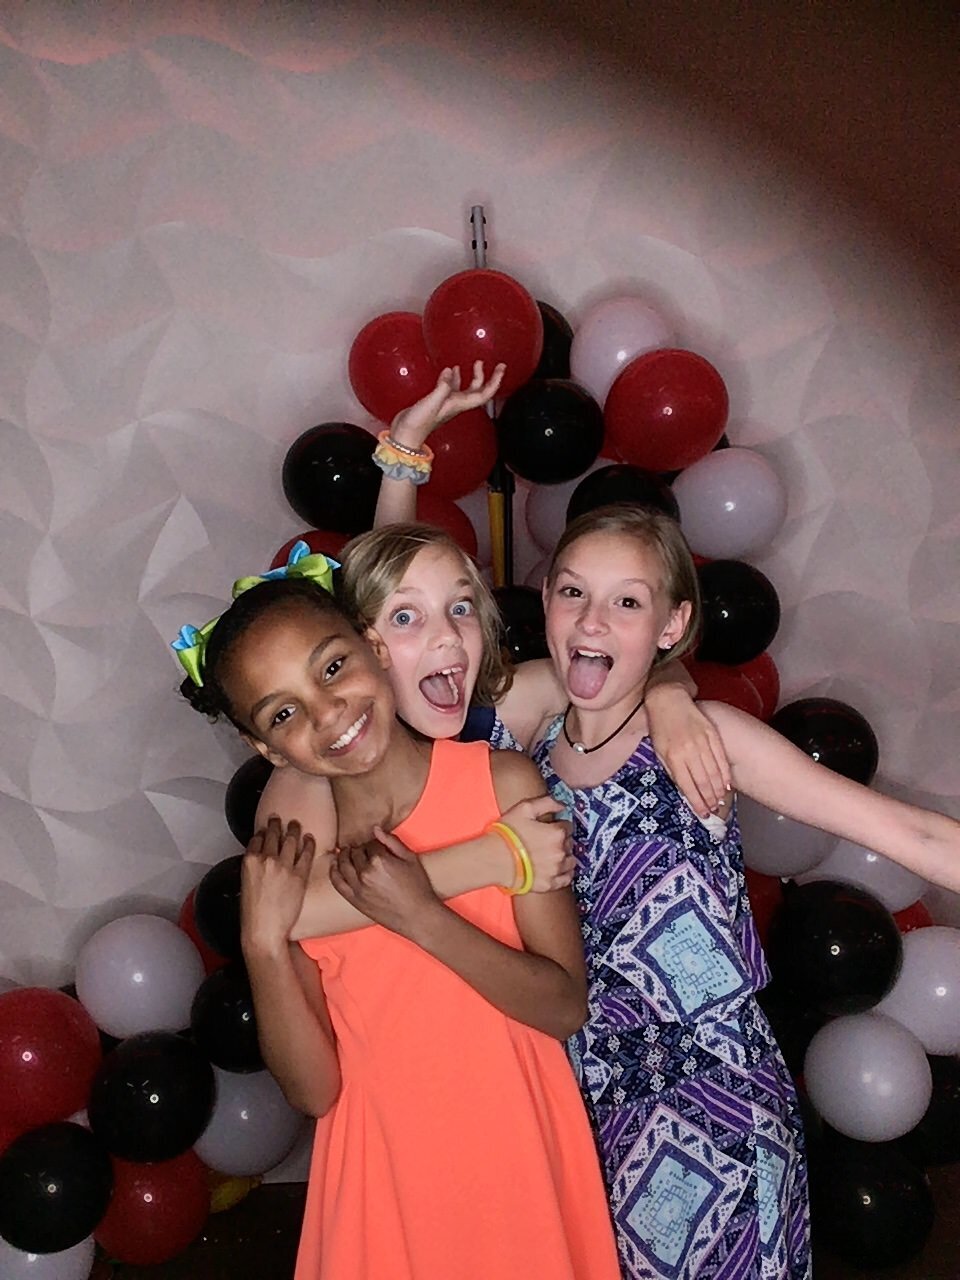 Friends together in photobooth for their sports event gala at The Fountains at the Gateway